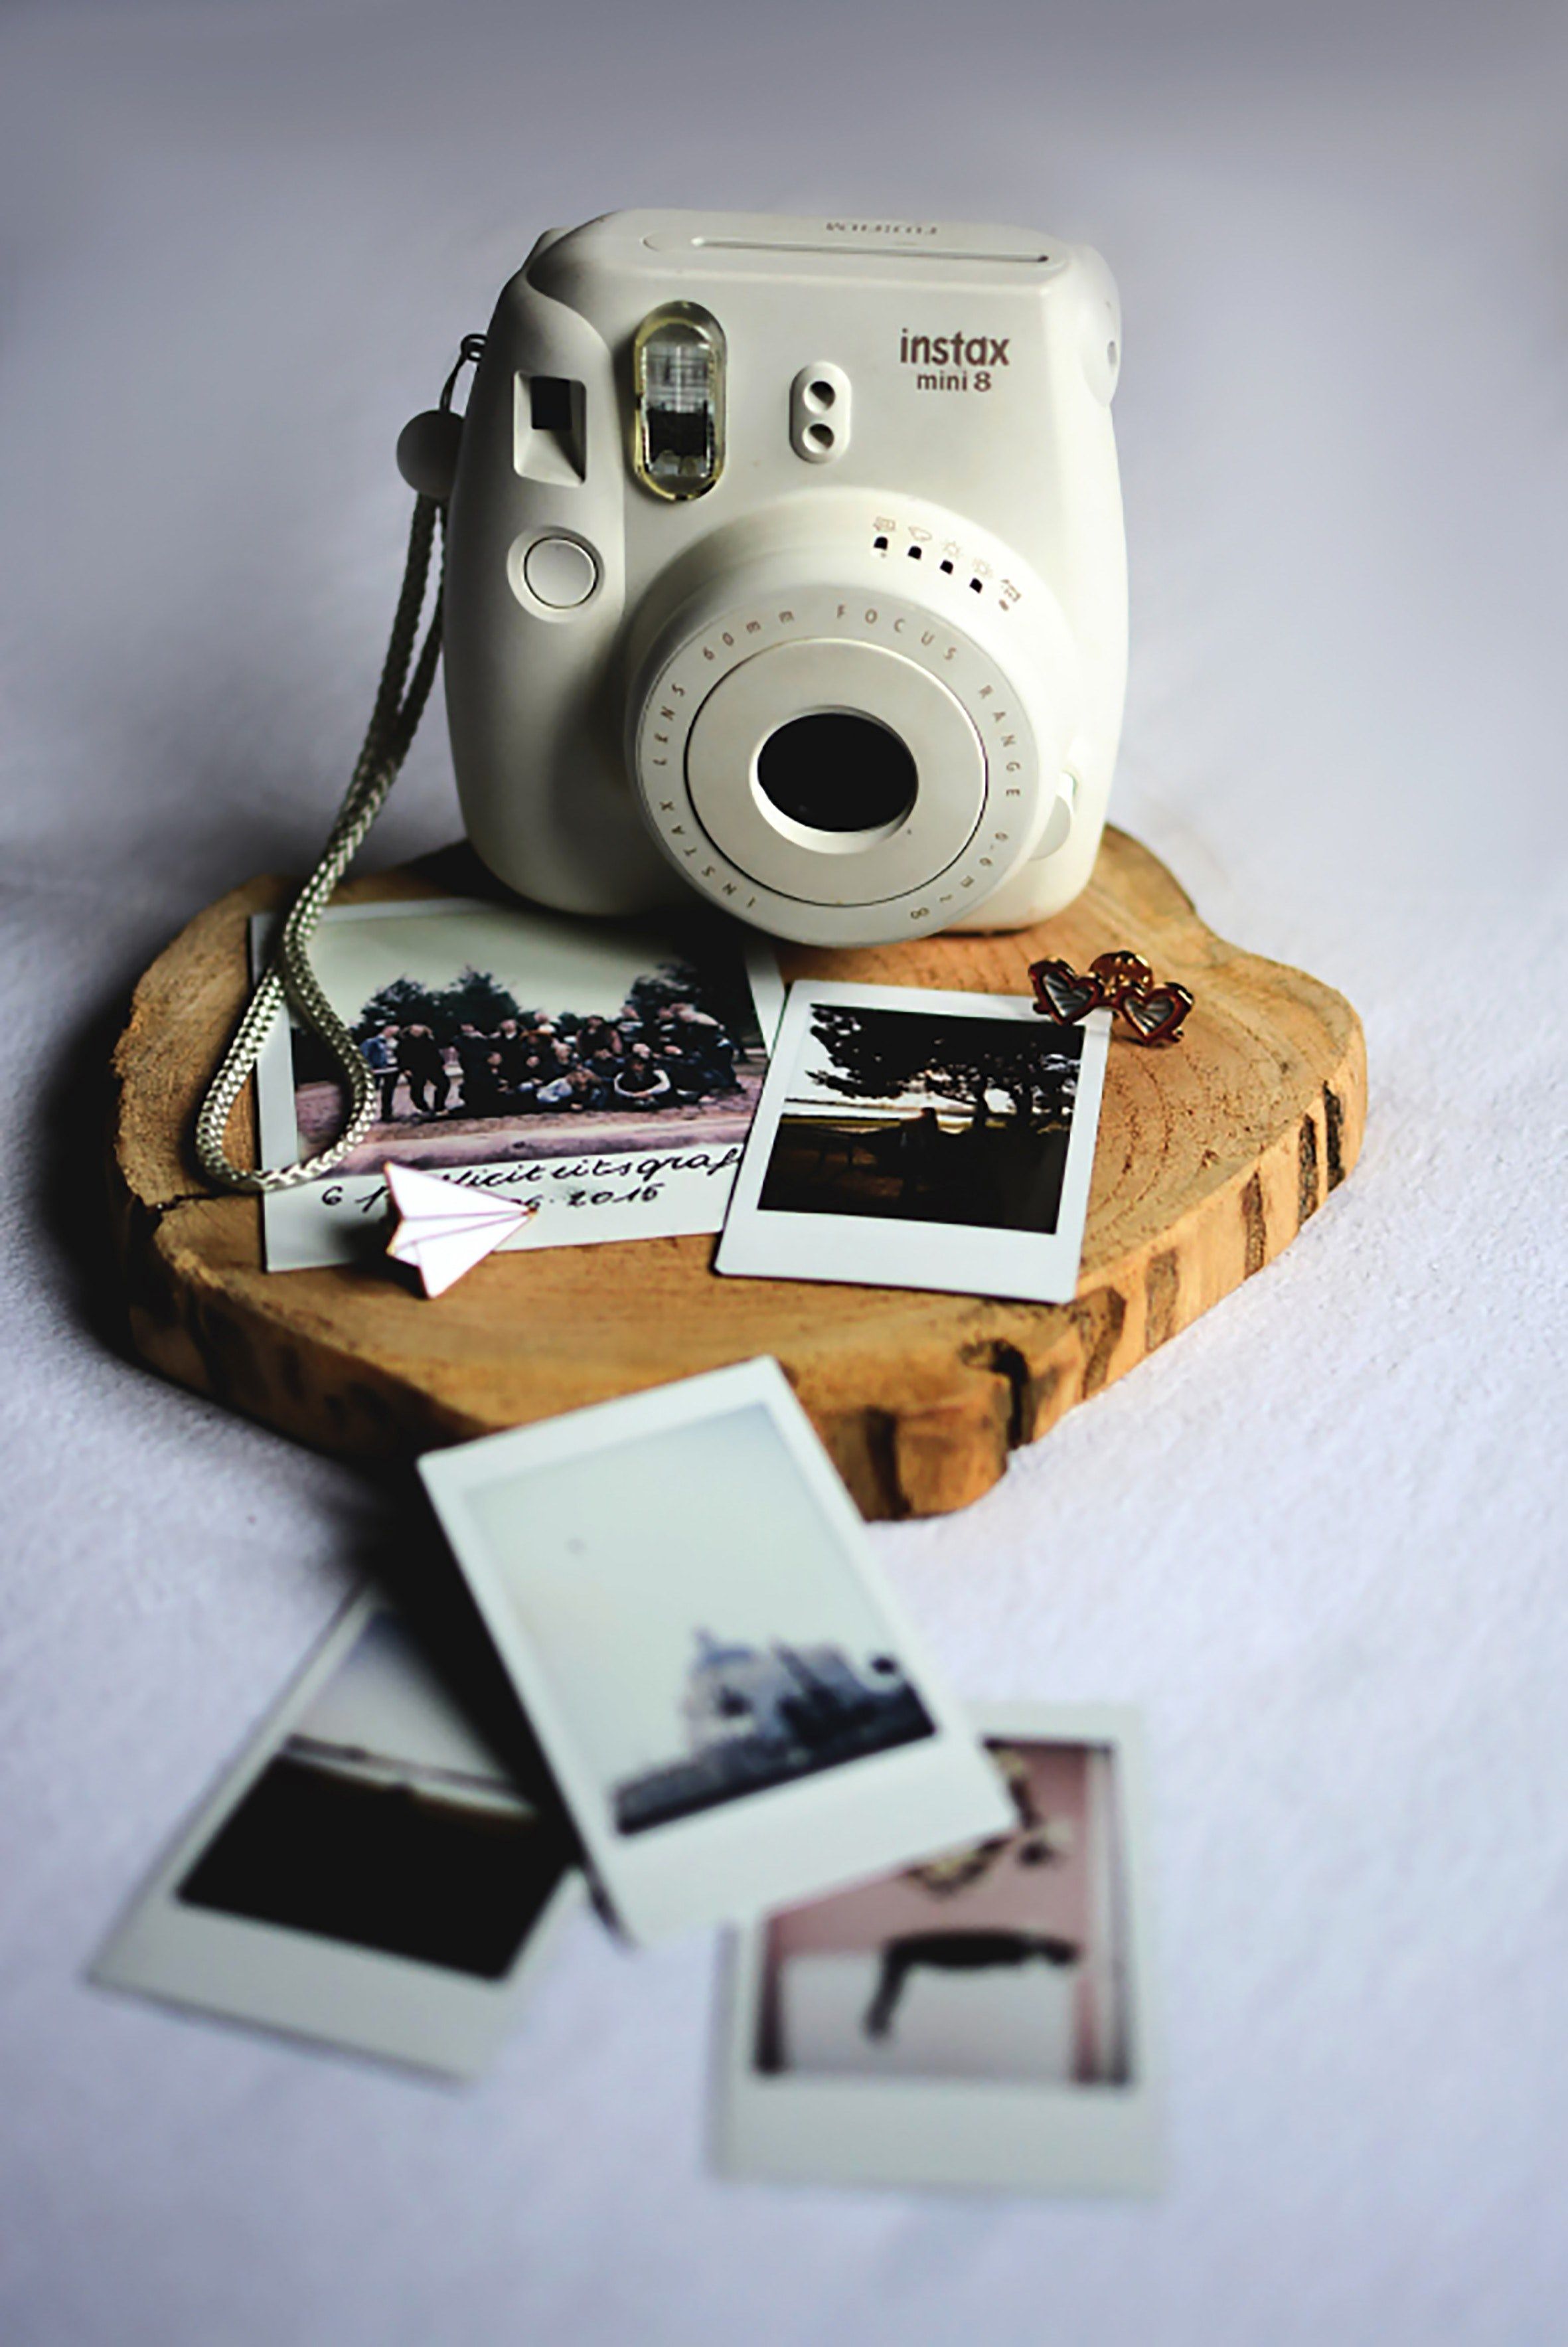 A polaroid camera sitting on top of some pictures - Polaroid